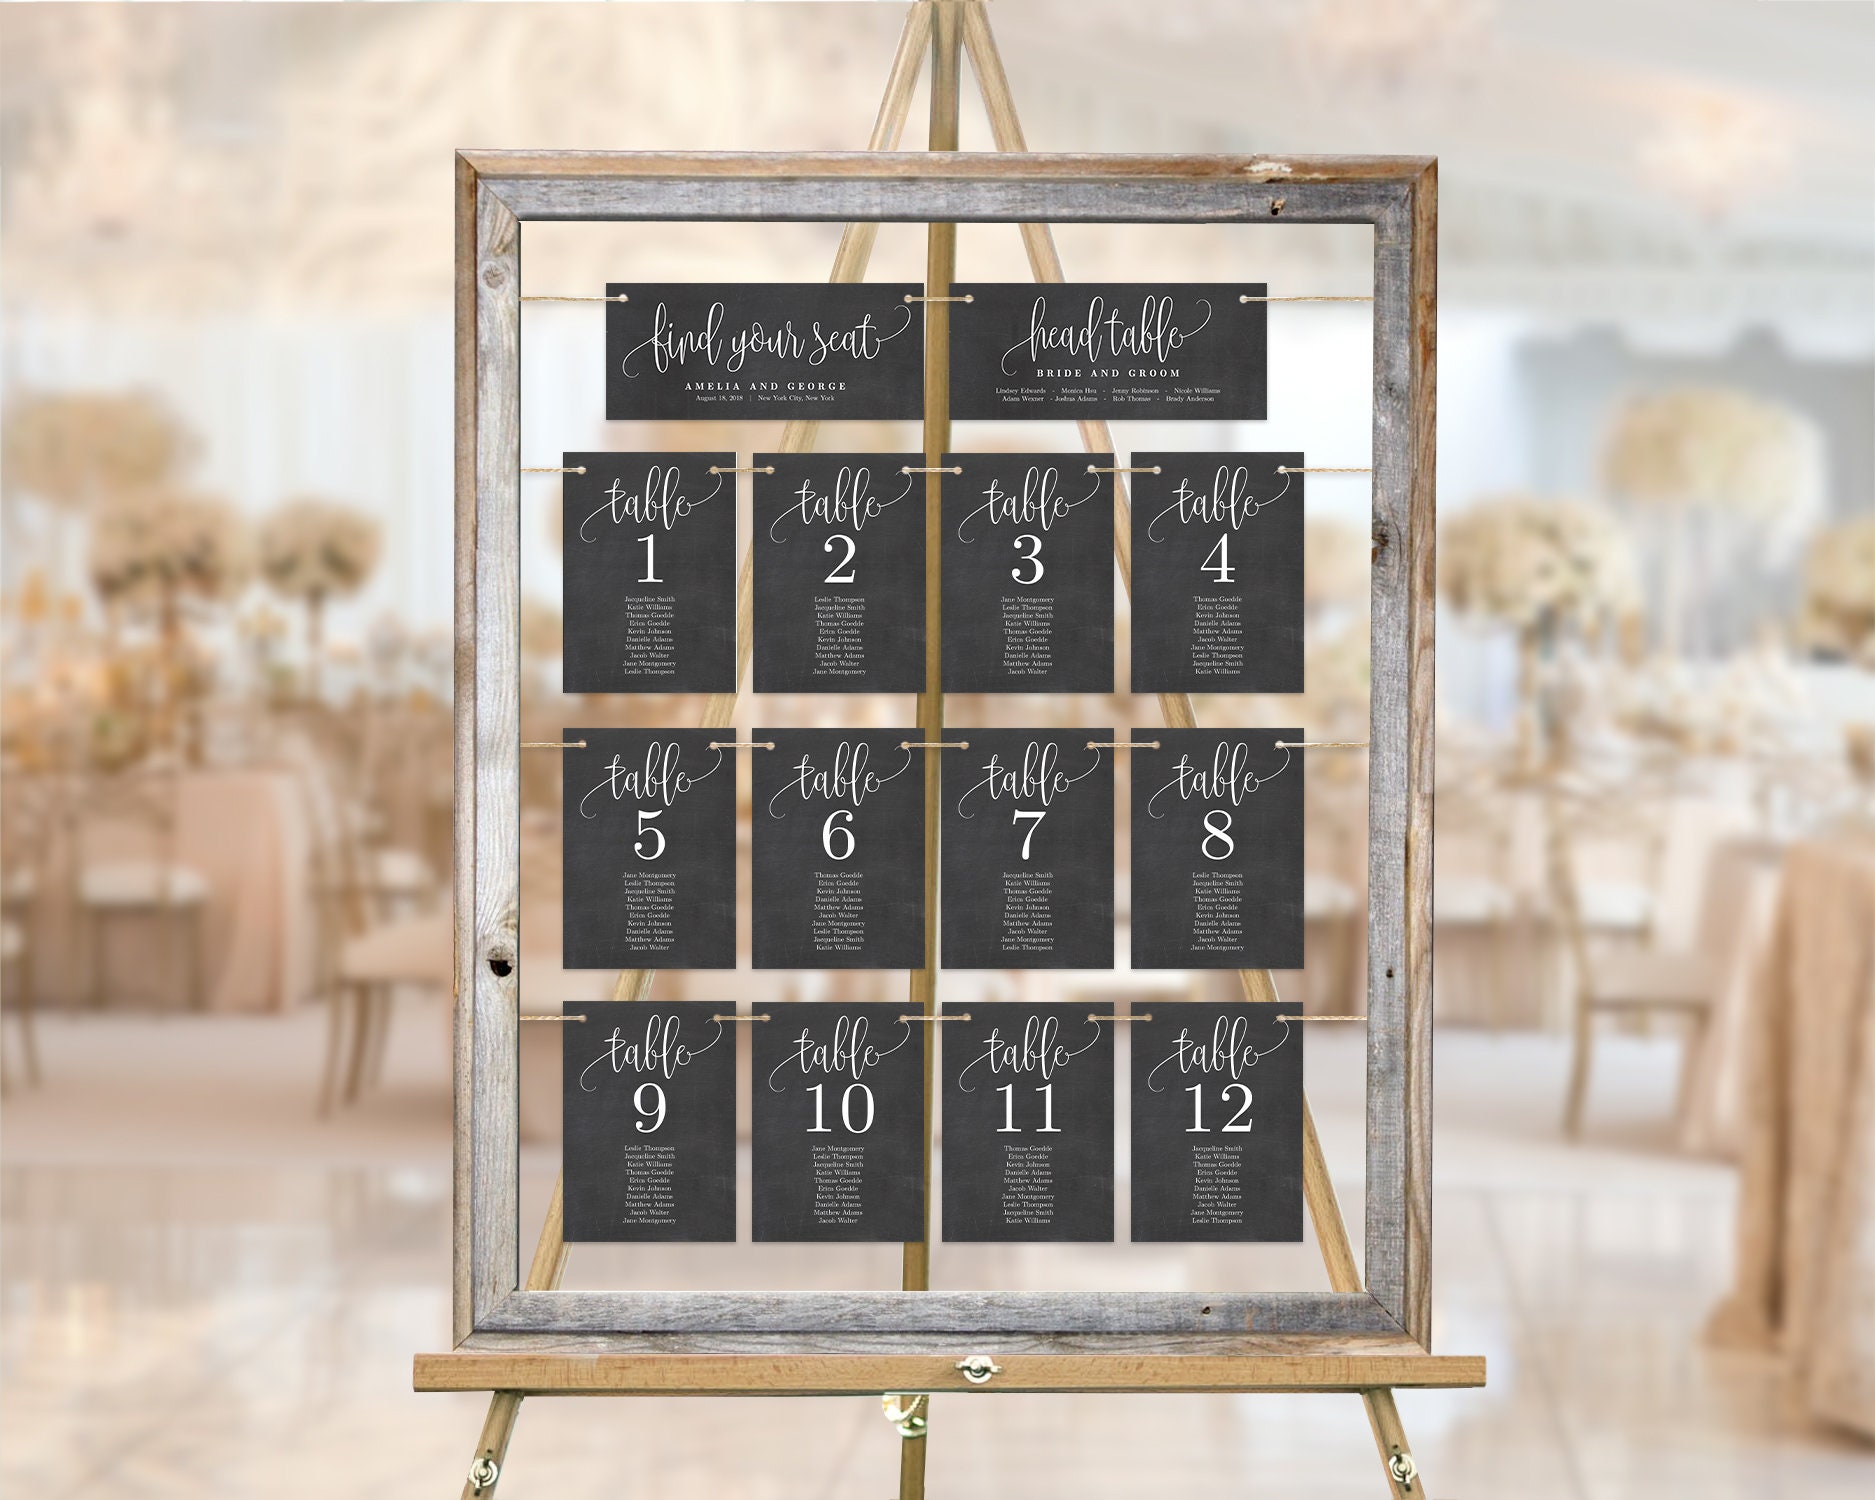 wedding seating chart. vintage seating chart. old shutters and close pins.  table numbers. {tpaisleydesign}